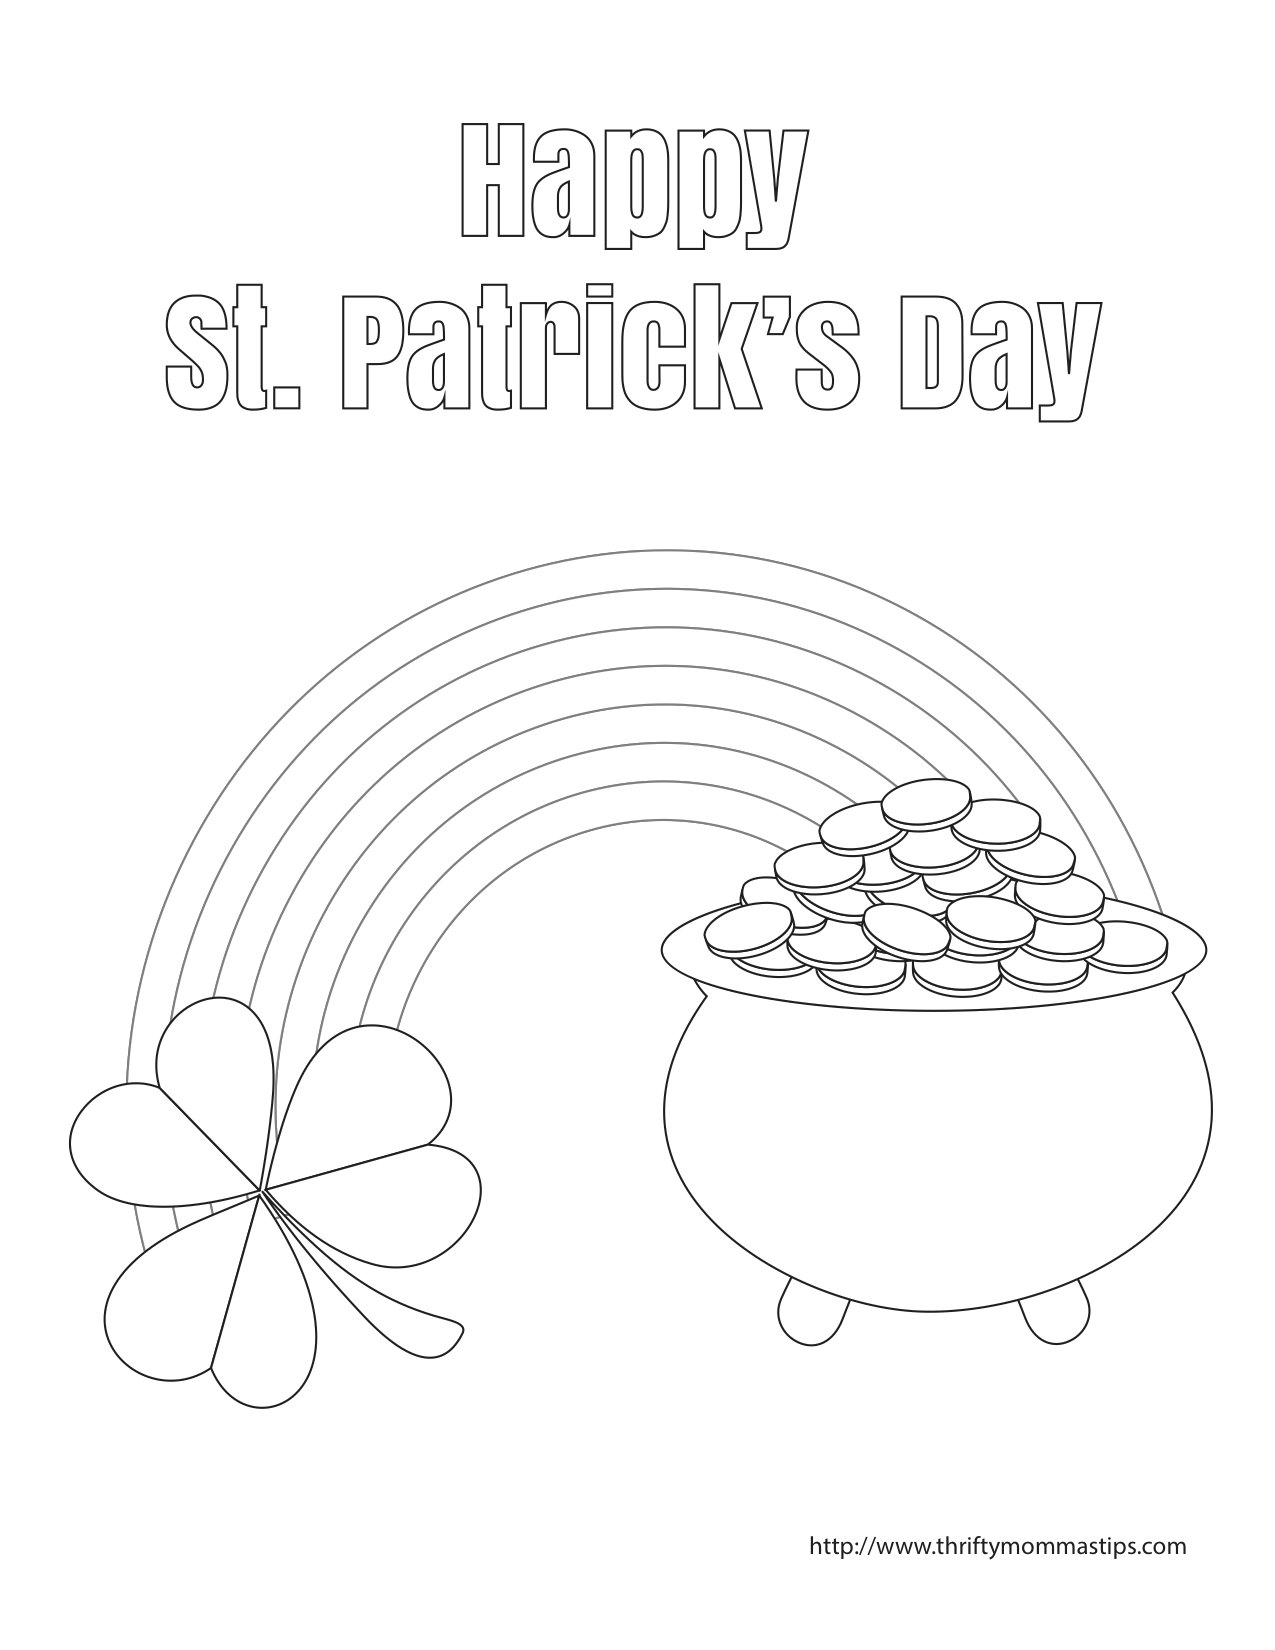 St Patrick's Day Pot of Gold Coloring Page — Thrifty Mommas Tips